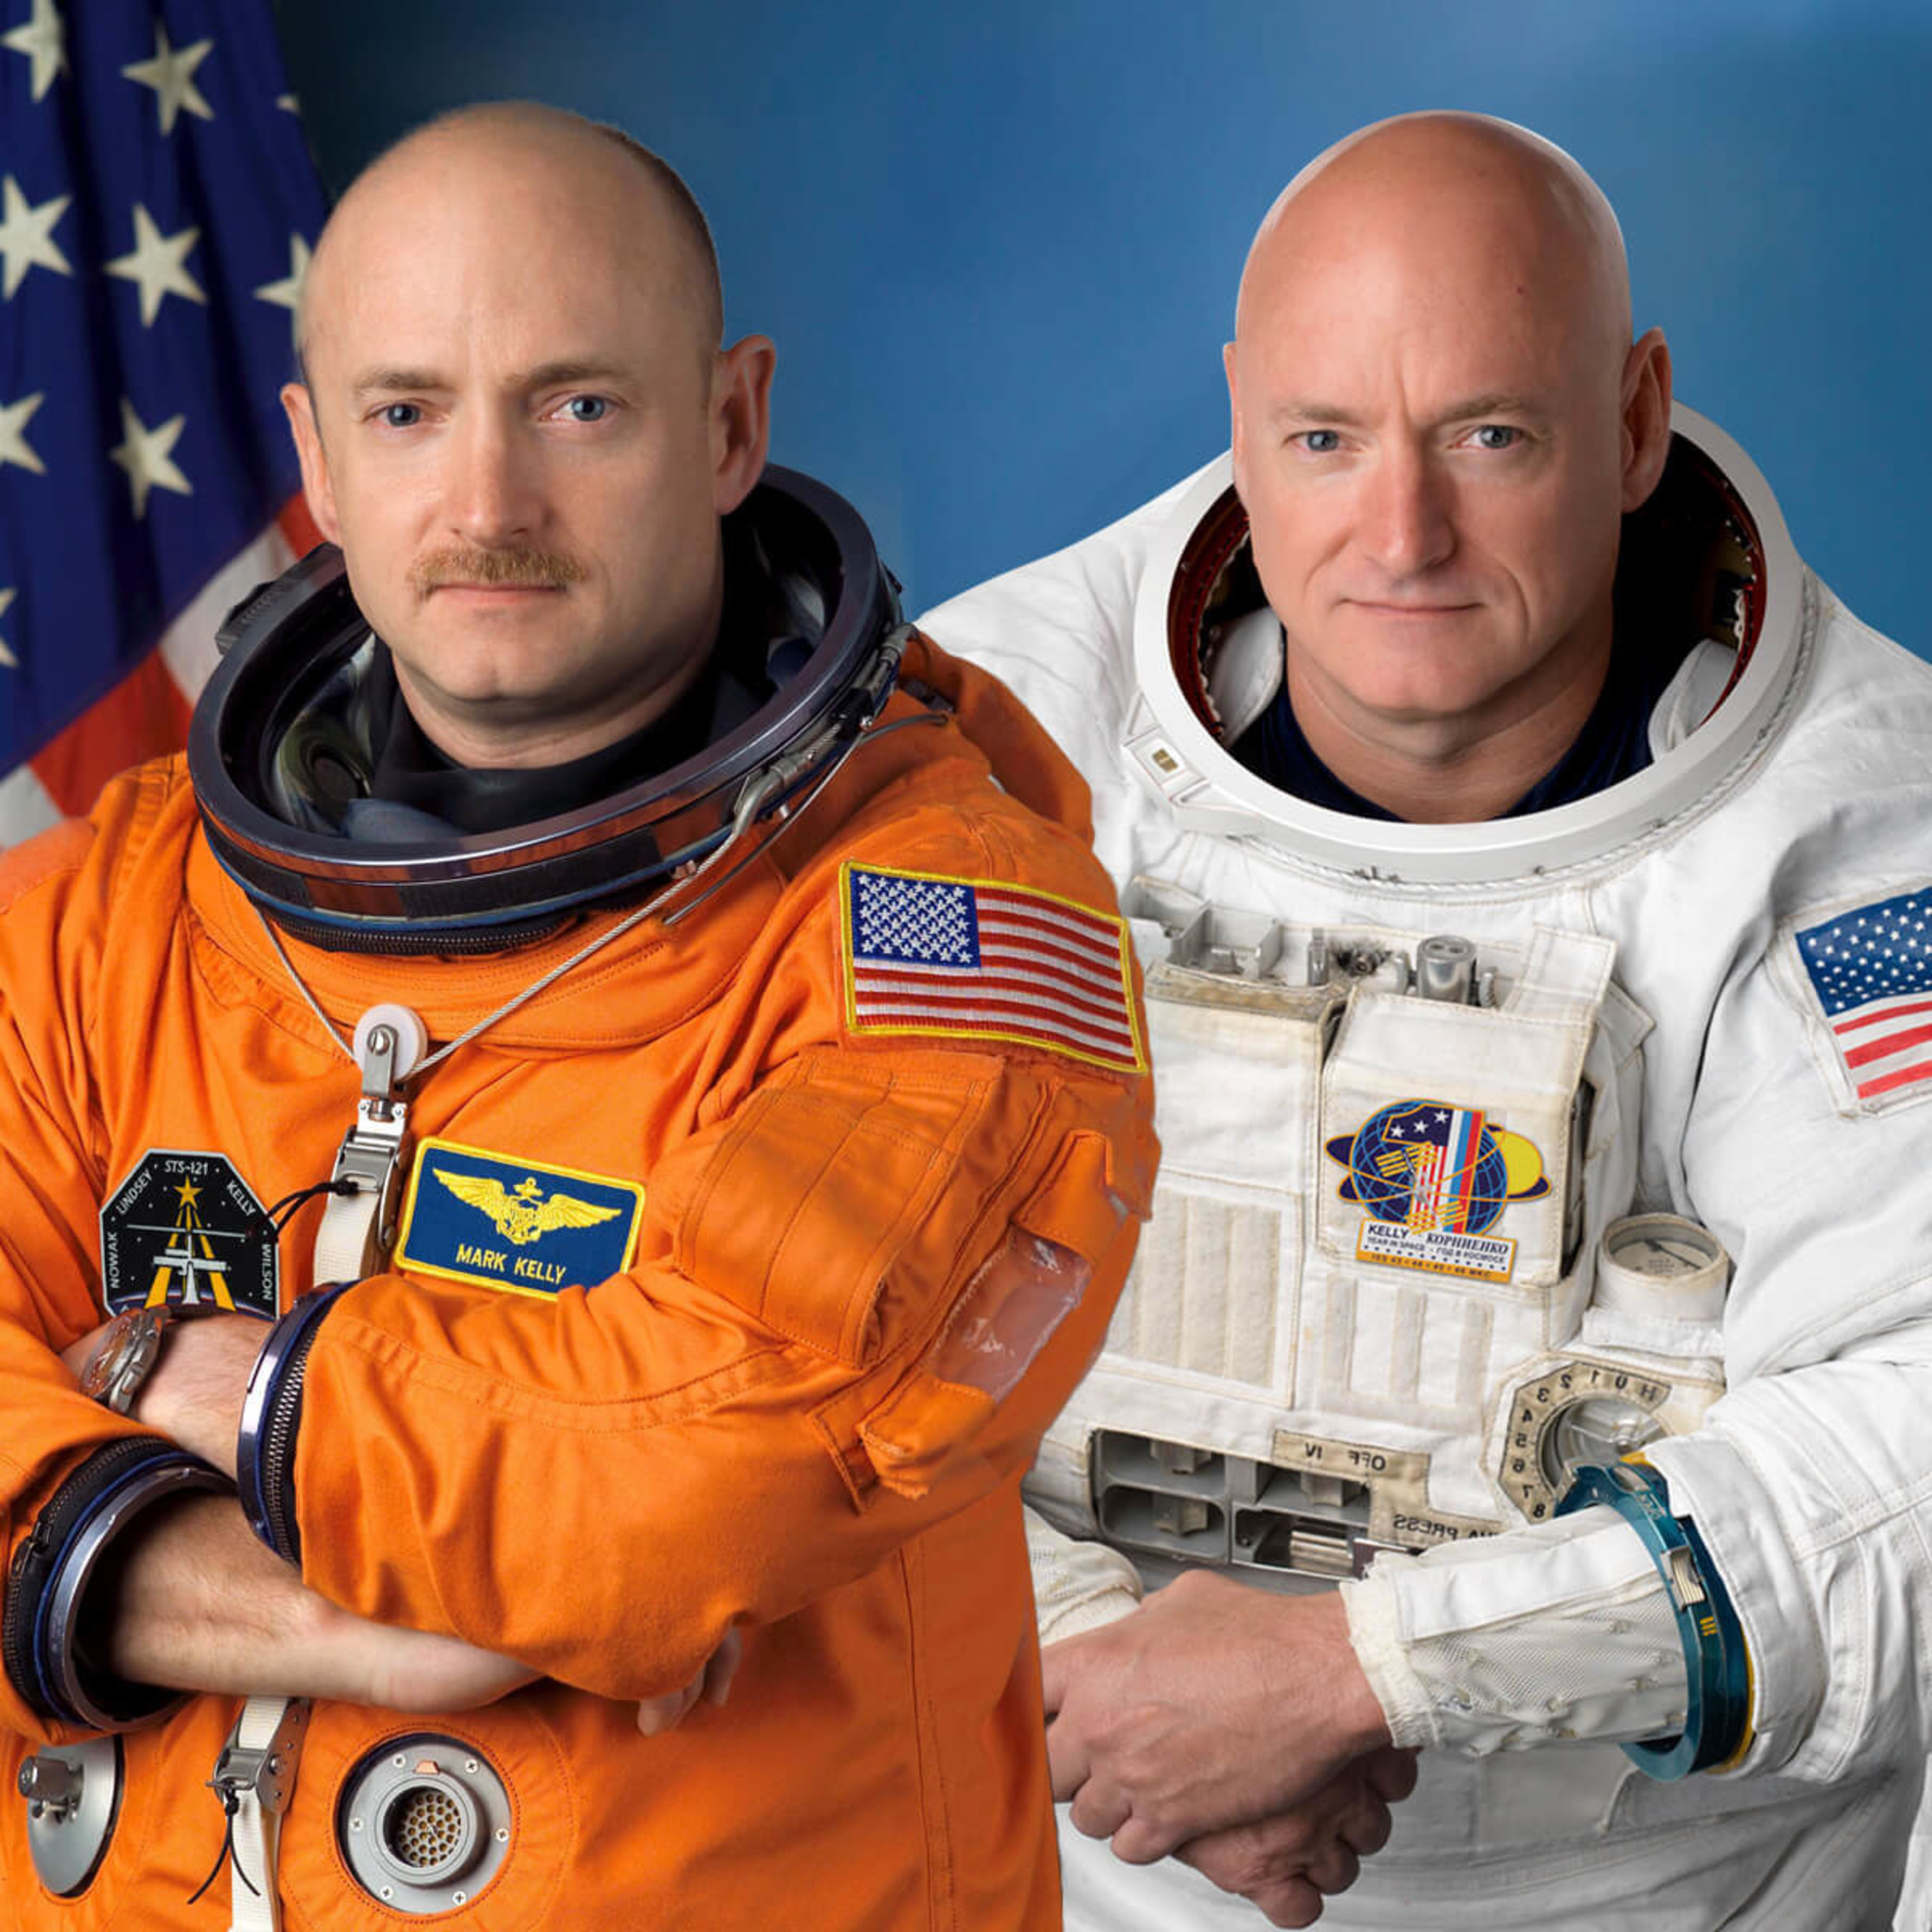 Shaklee(R) Announces Astronauts, Aviators and American HeroesCaptain Mark Kelly and Captain Scott Kelly as Keynote Speakers at"Shaklee Live" in Orlando, Florida